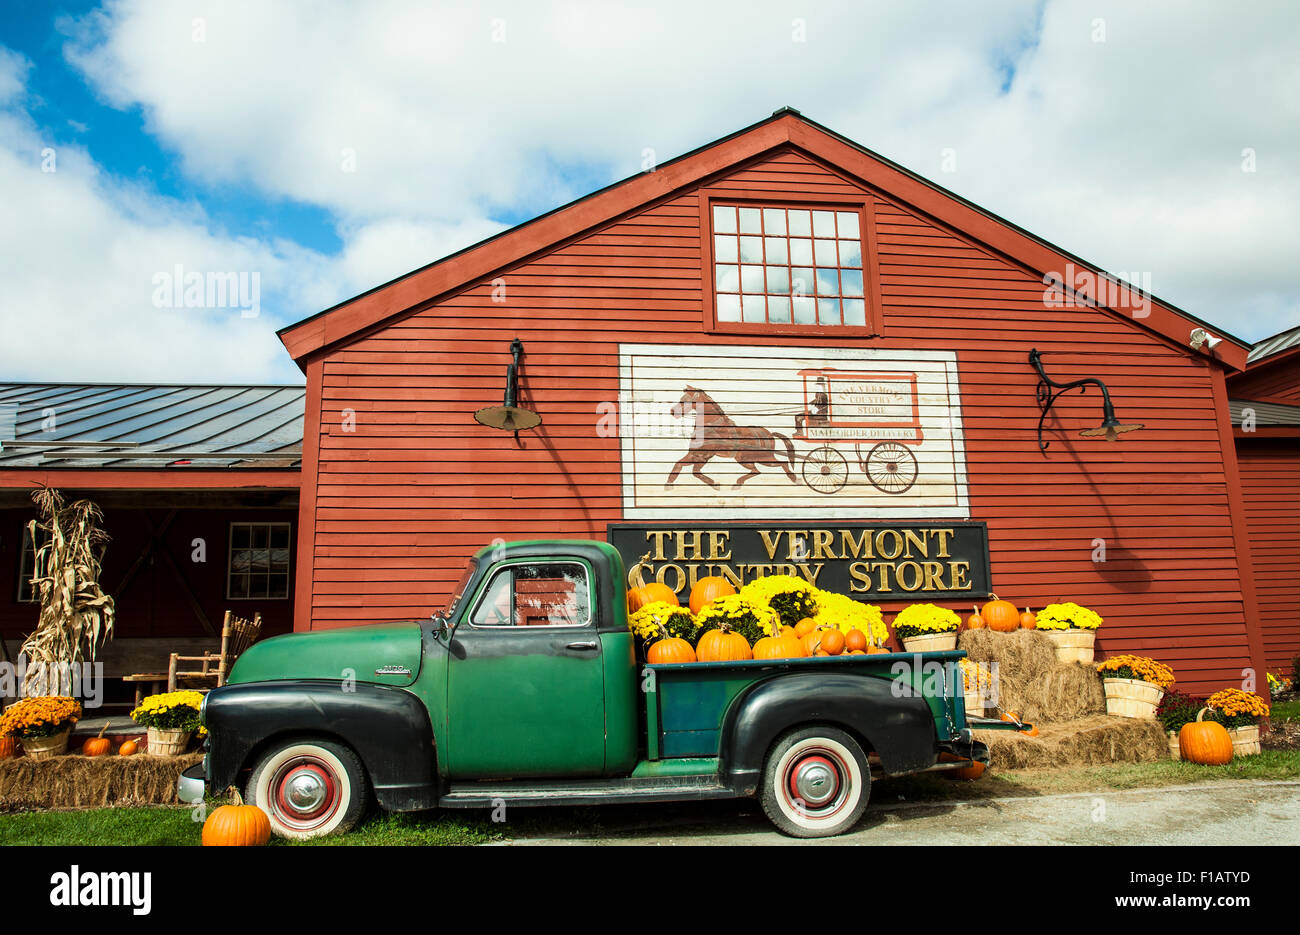 Colorful autumn pumpkins, chrysanthemums1953 Chevy pickup truck at The Vermont Country Store Oct 2014 Weston,Vermont, fall New England, USA Stock Photo